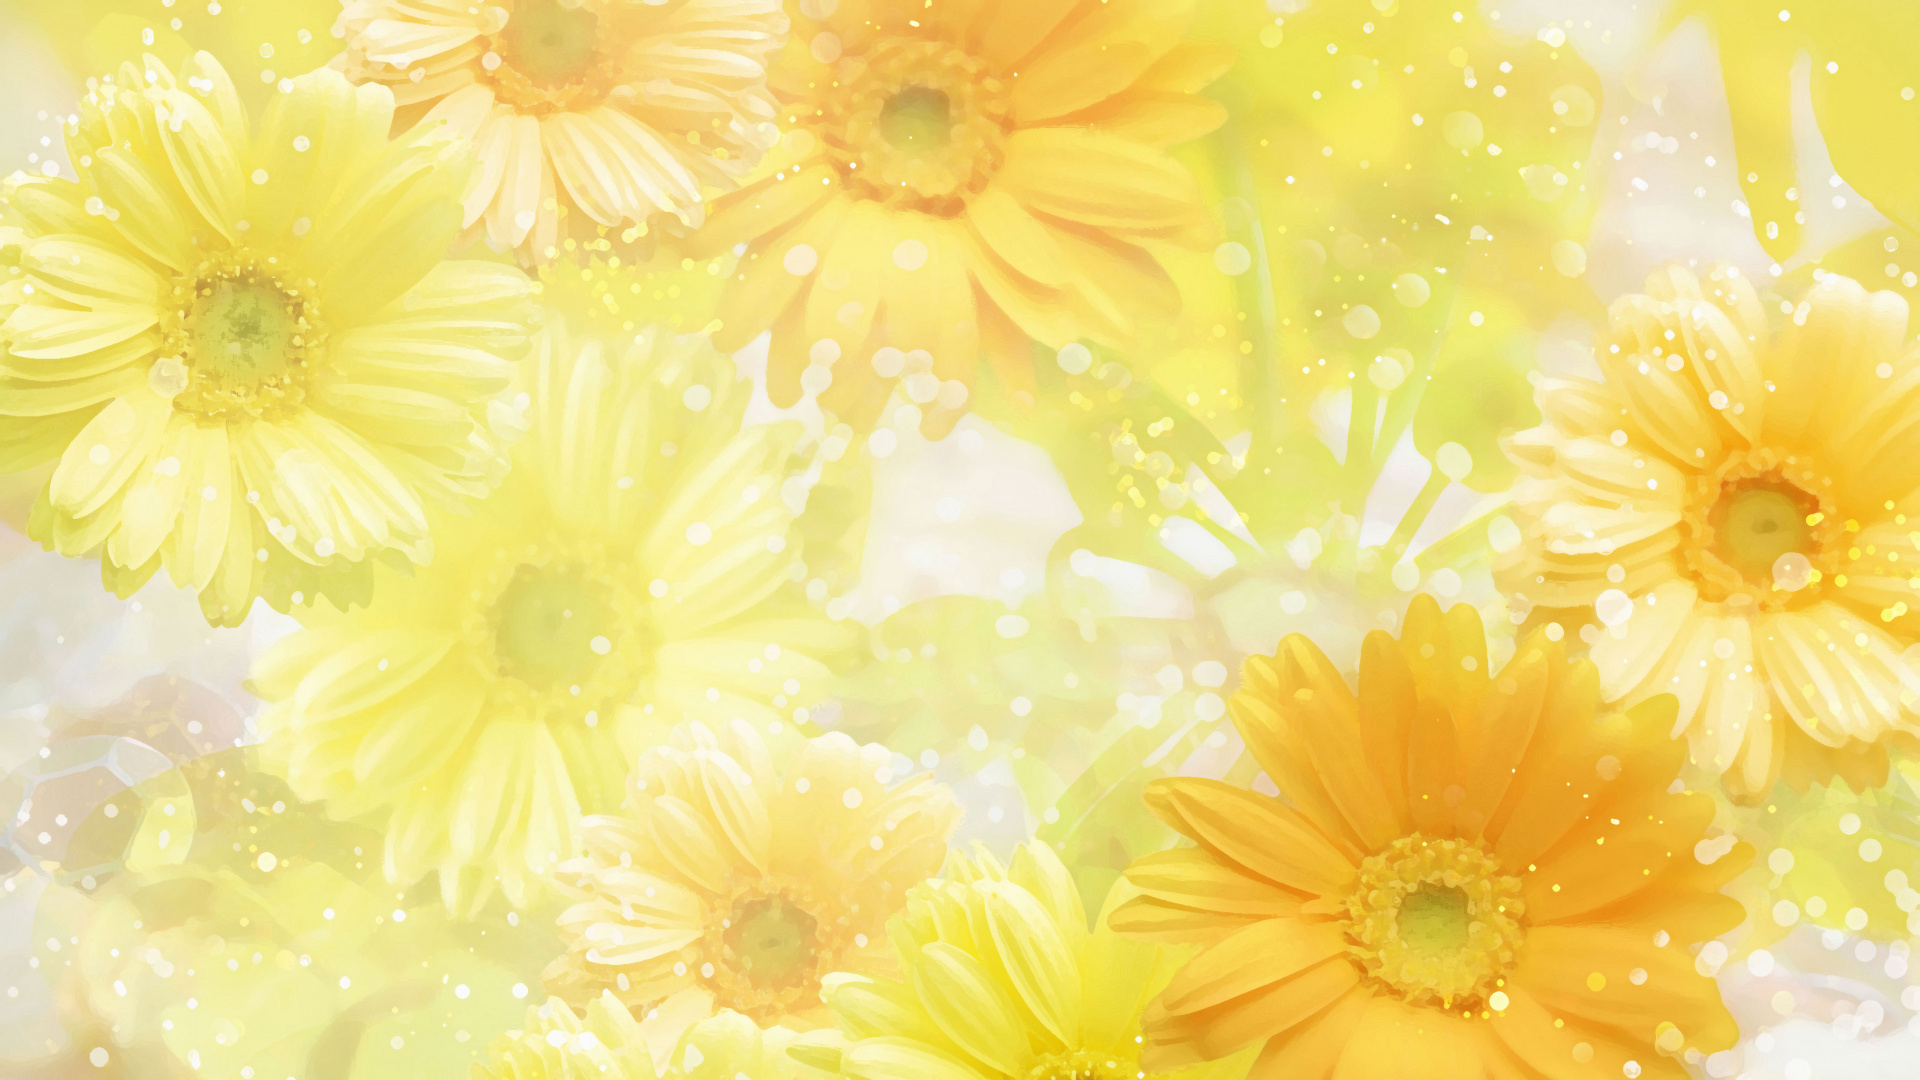 Yellow and White Daisy Flower. Wallpaper in 1920x1080 Resolution